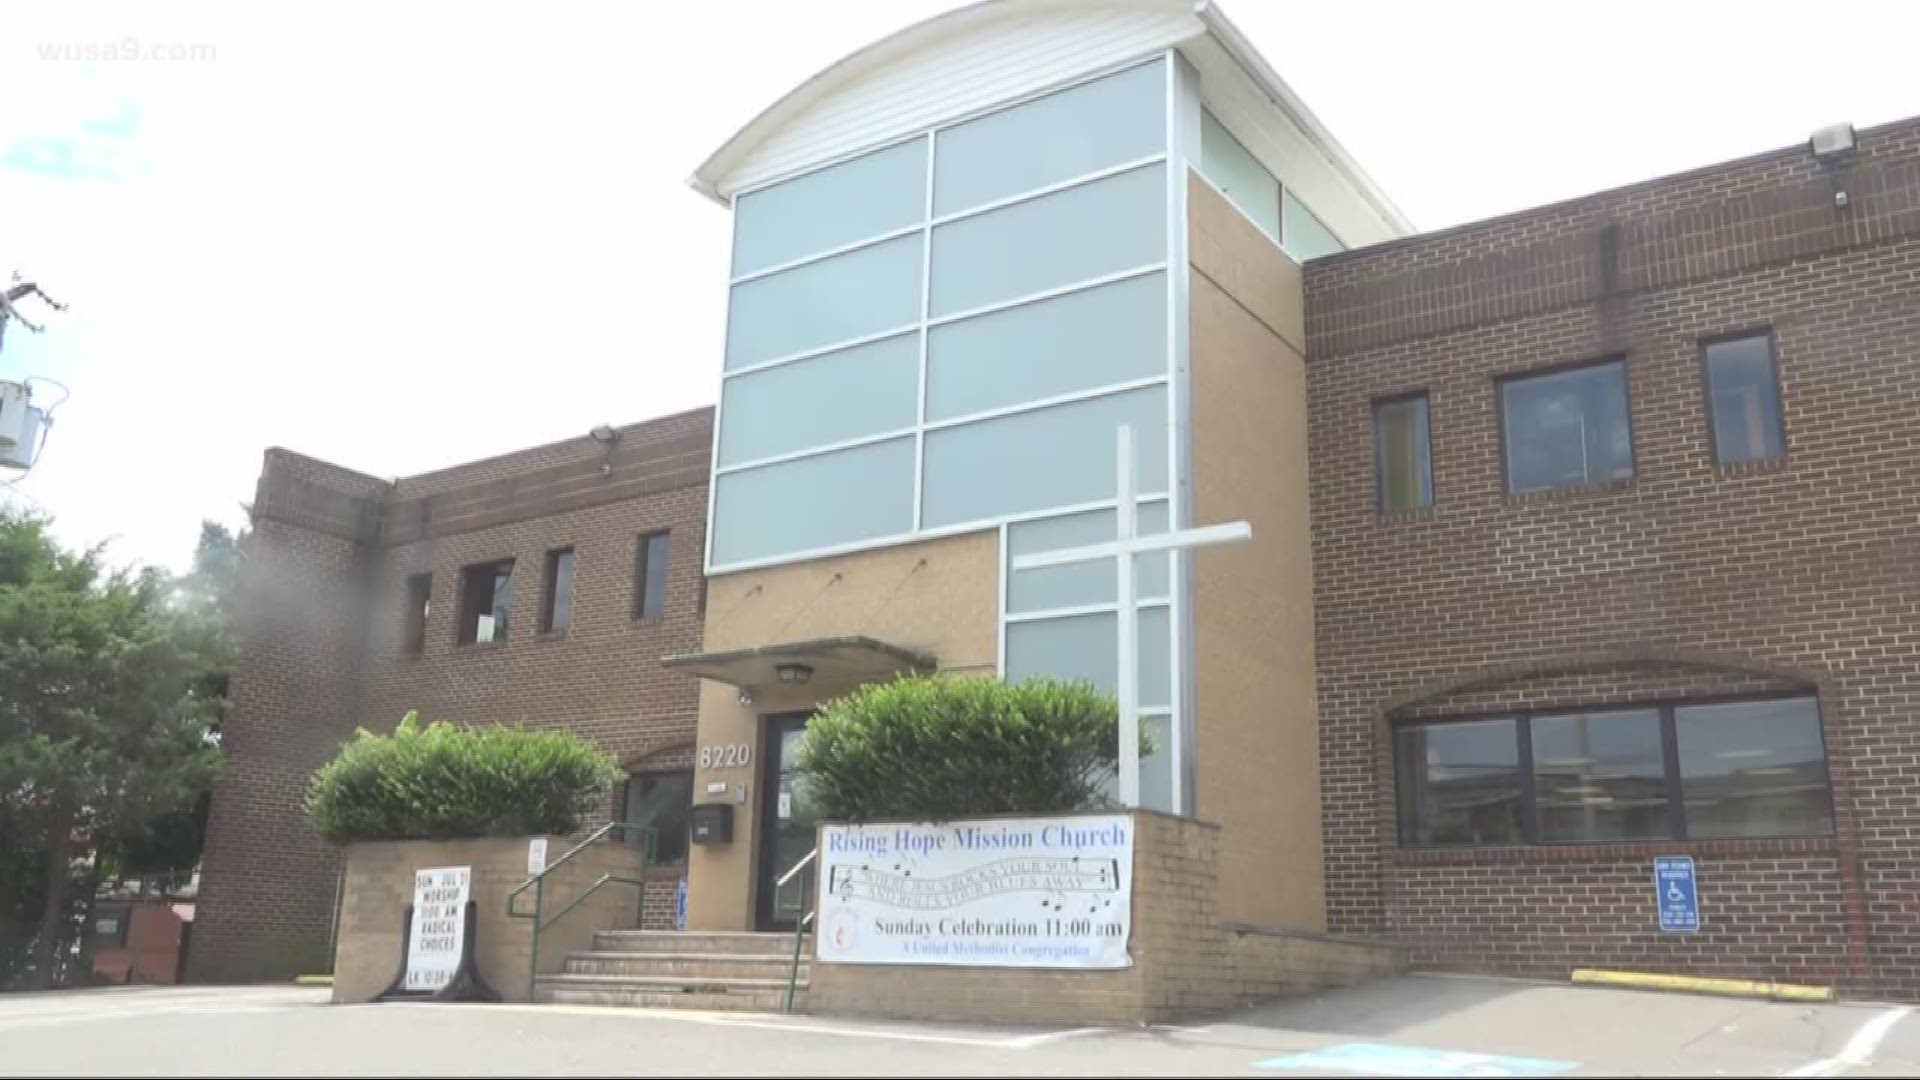 Over 60 churches, mosques and temples in the DMV have offered for years now, to provide a sanctuary for undocumented immigrants who fear being detained. But what are the rules and laws surrounding this?